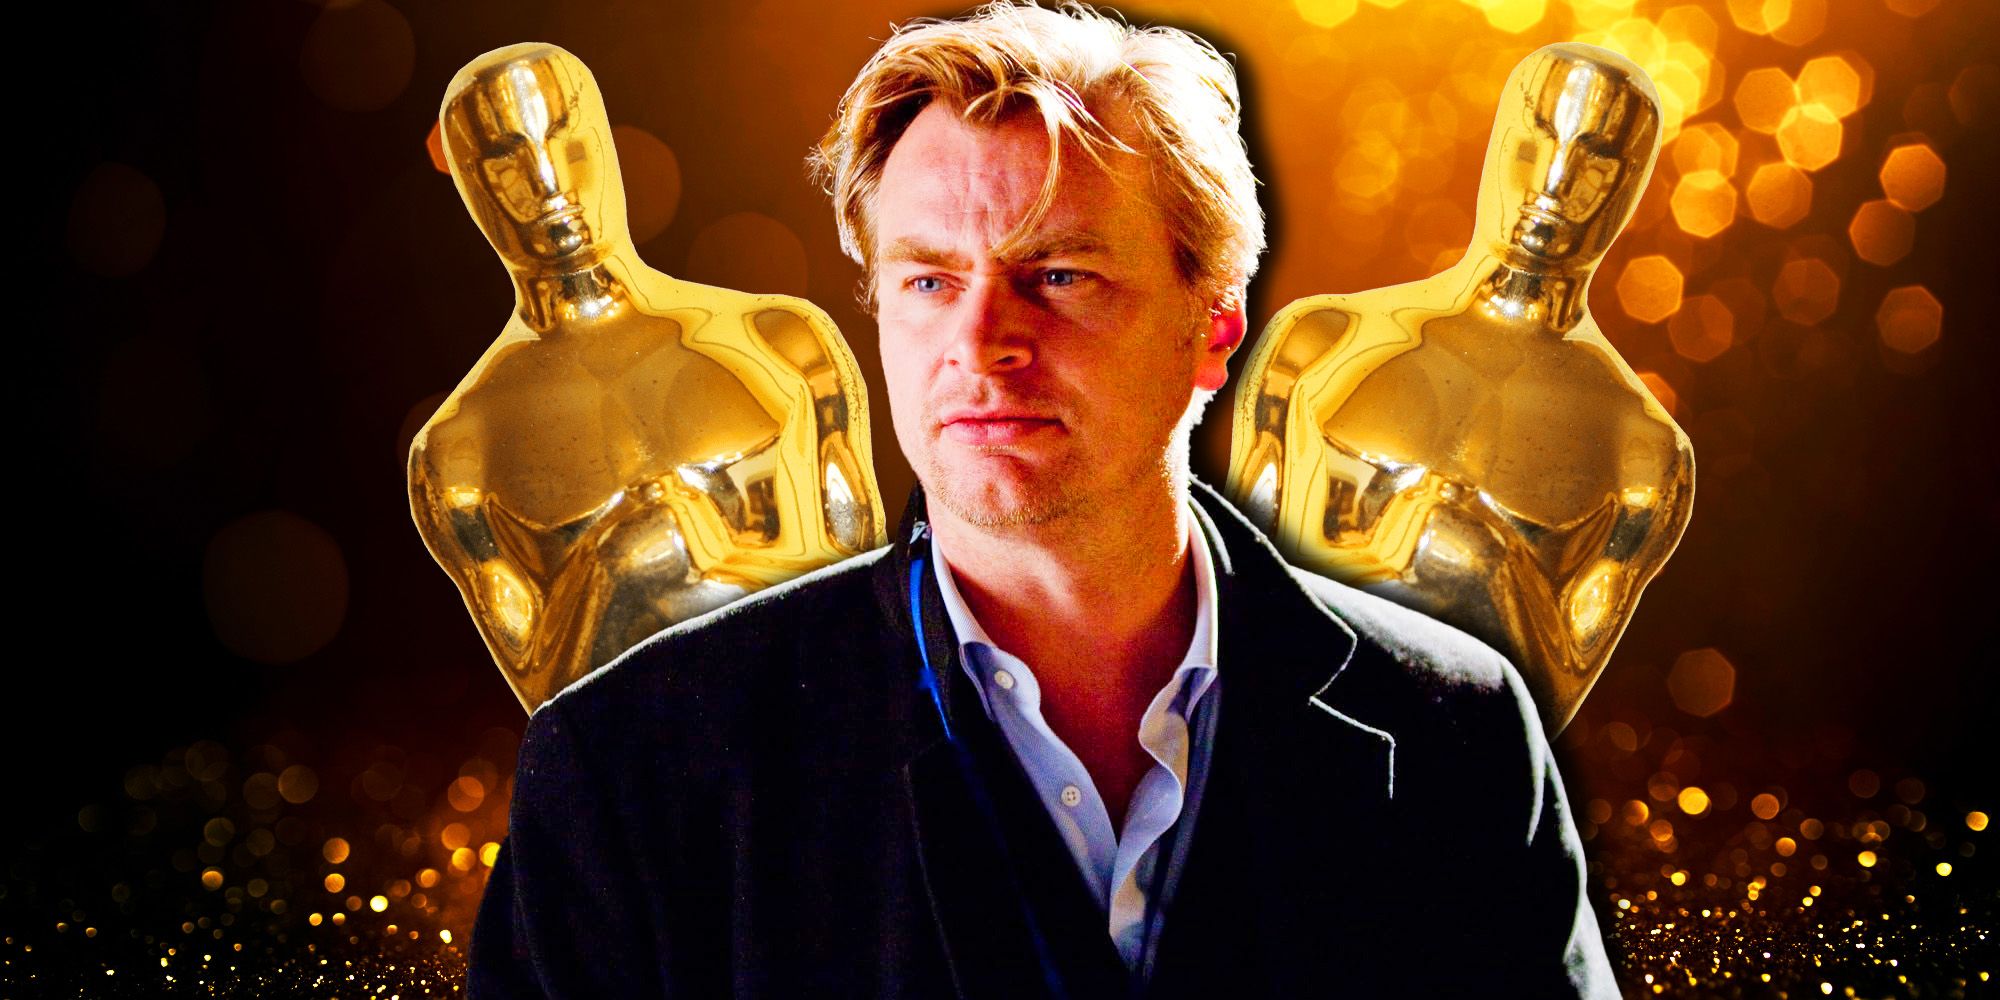 Christopher Nolan’s “Confusing Movie” Defense Works For Inception, But Not Tenet